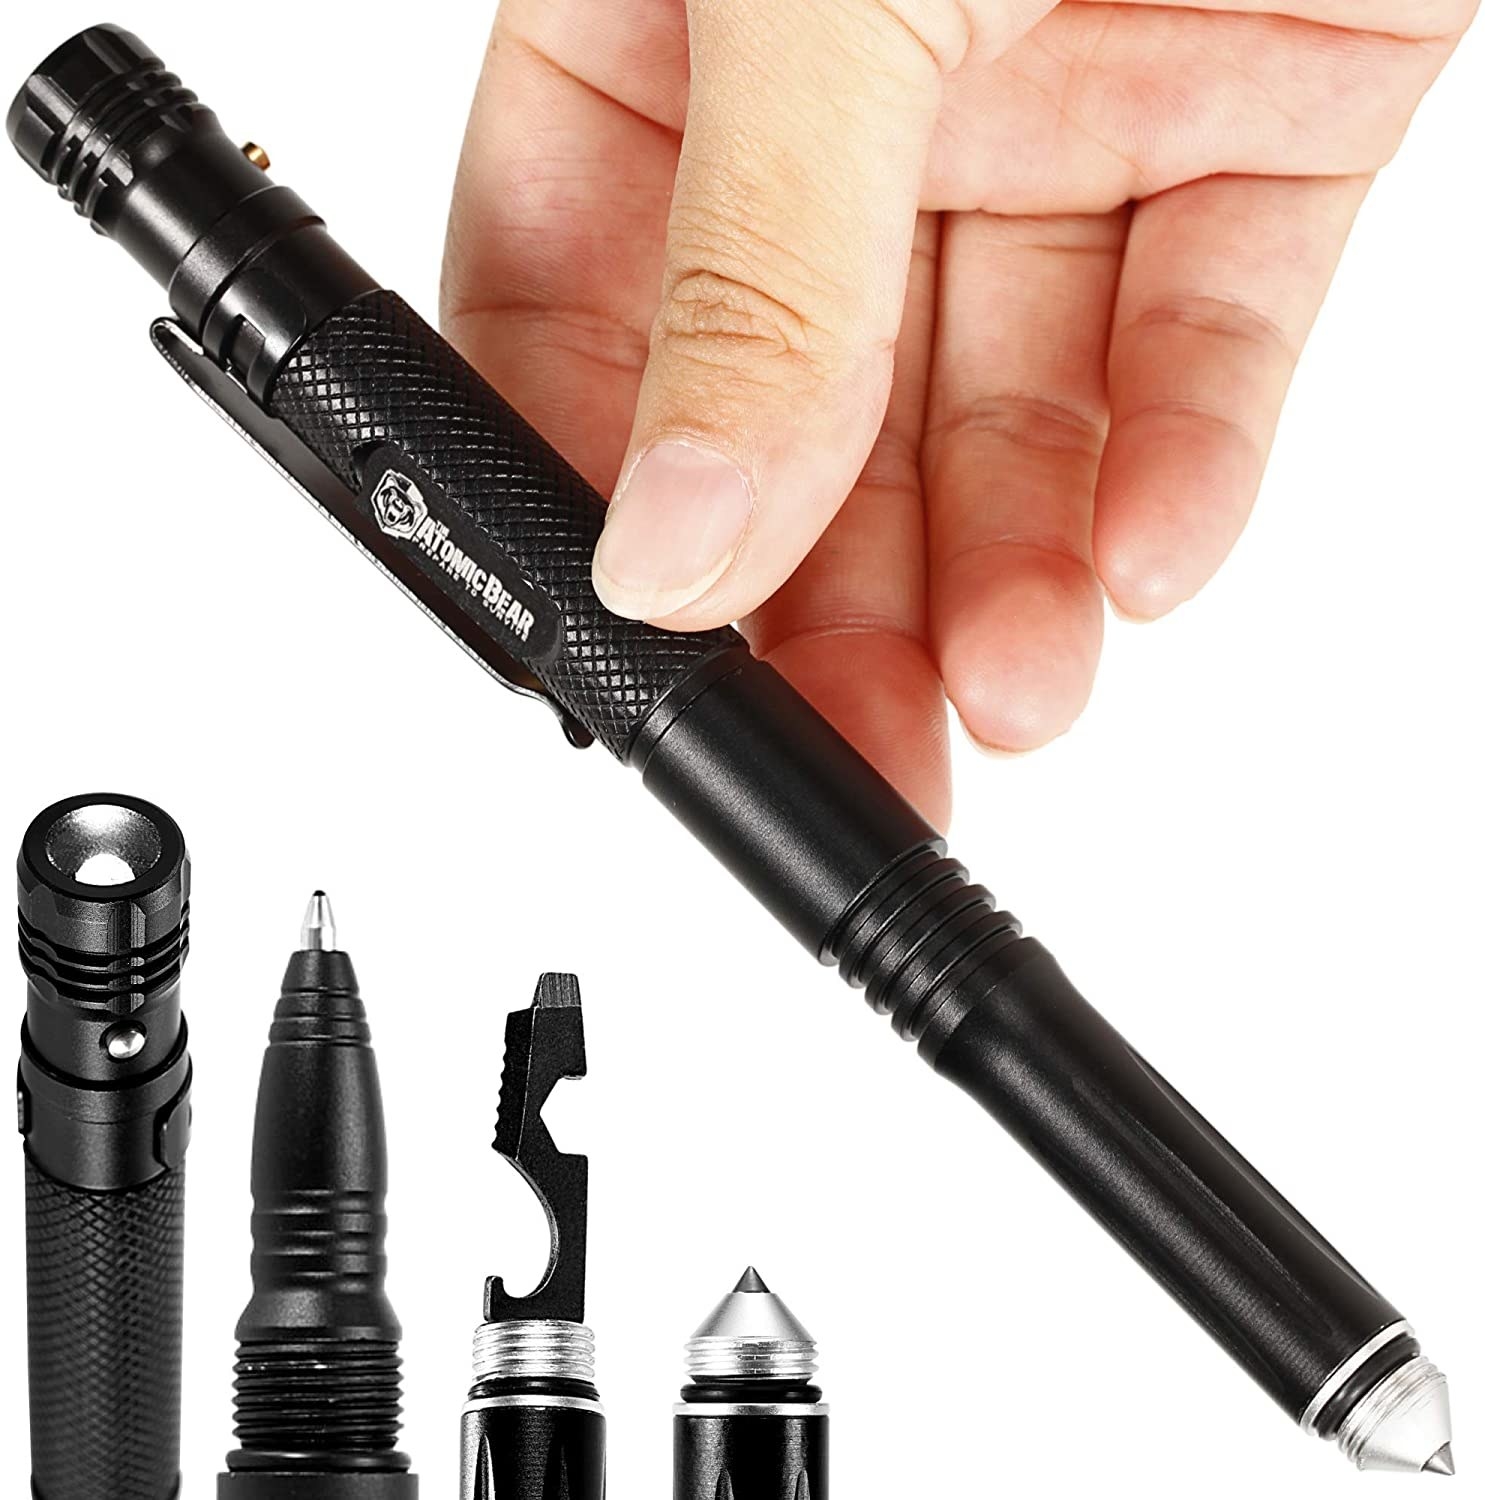 The tactical pen that comes with a flashlight, screwdriver, and car window breaker